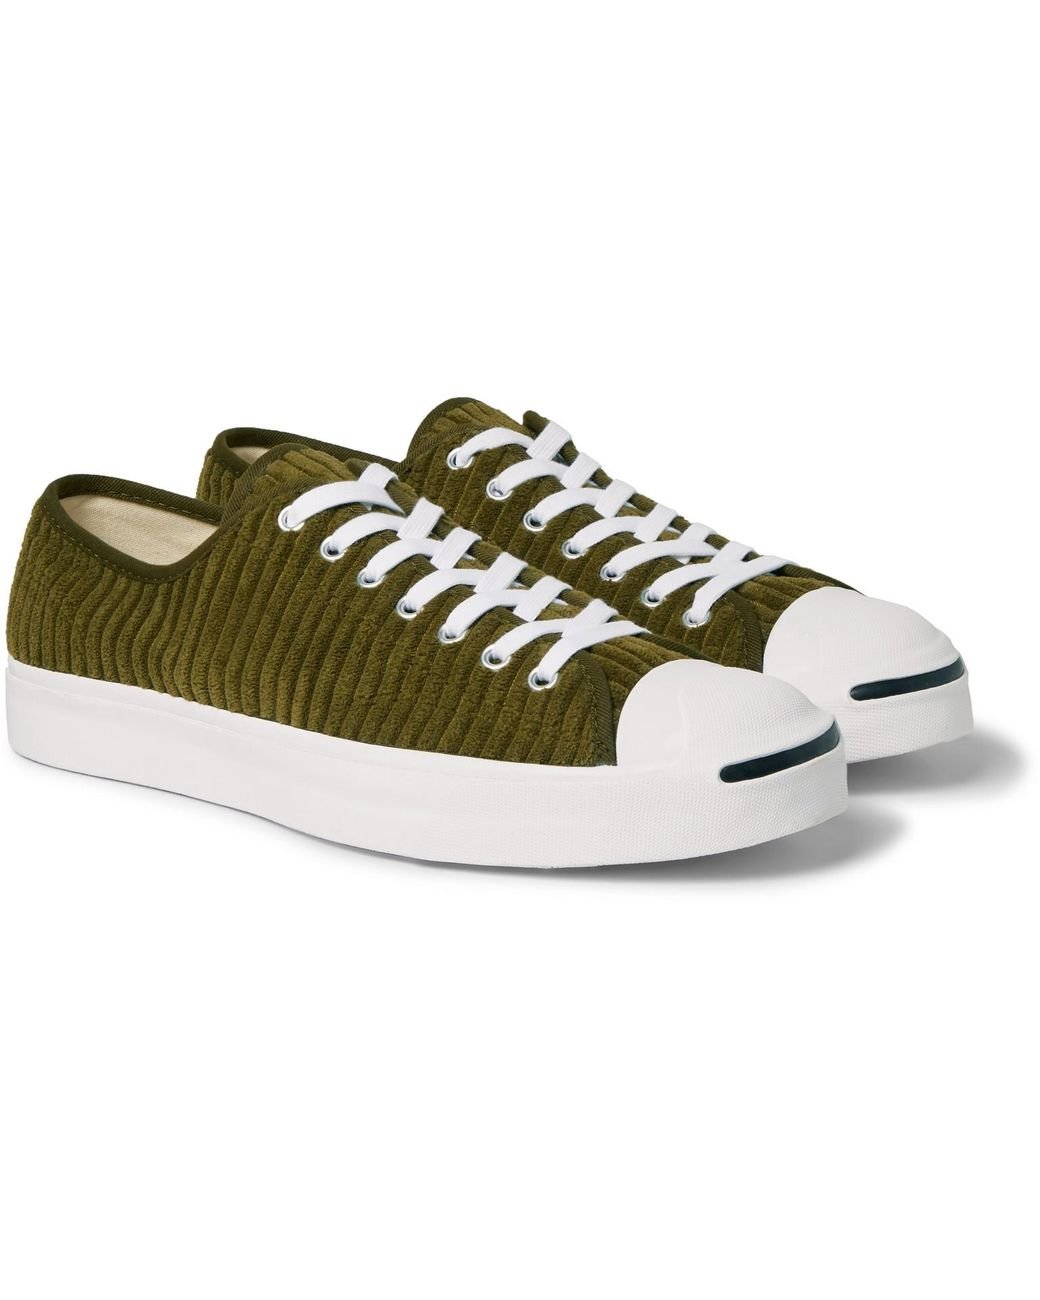 Converse Corduroy Jack Purcell 165138c (wide Wale Cord) in Green for ...